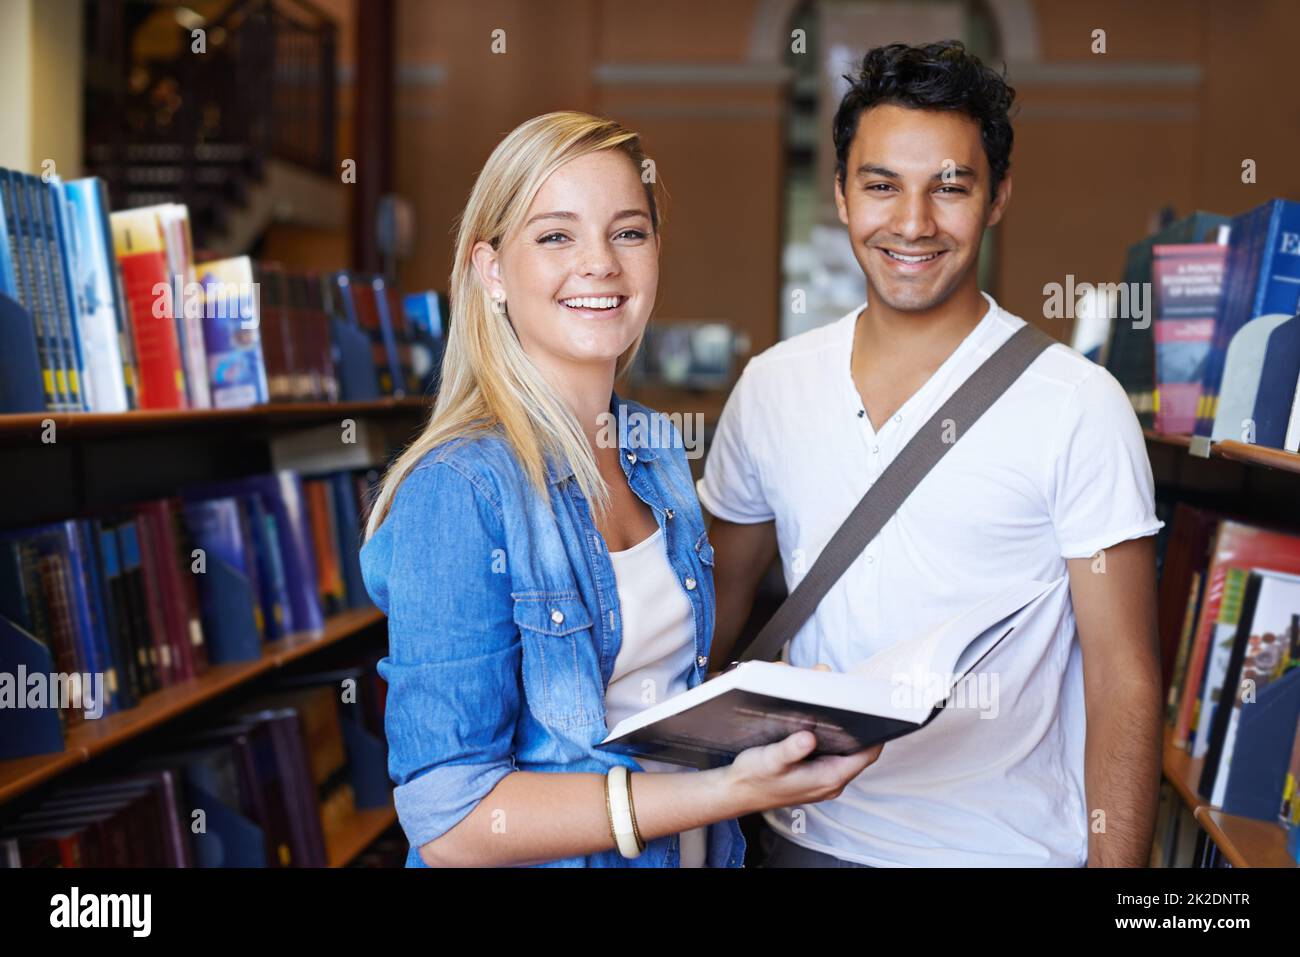 Working together to prepare for finals. A group of young people studying together for the upcoming exams. Stock Photo